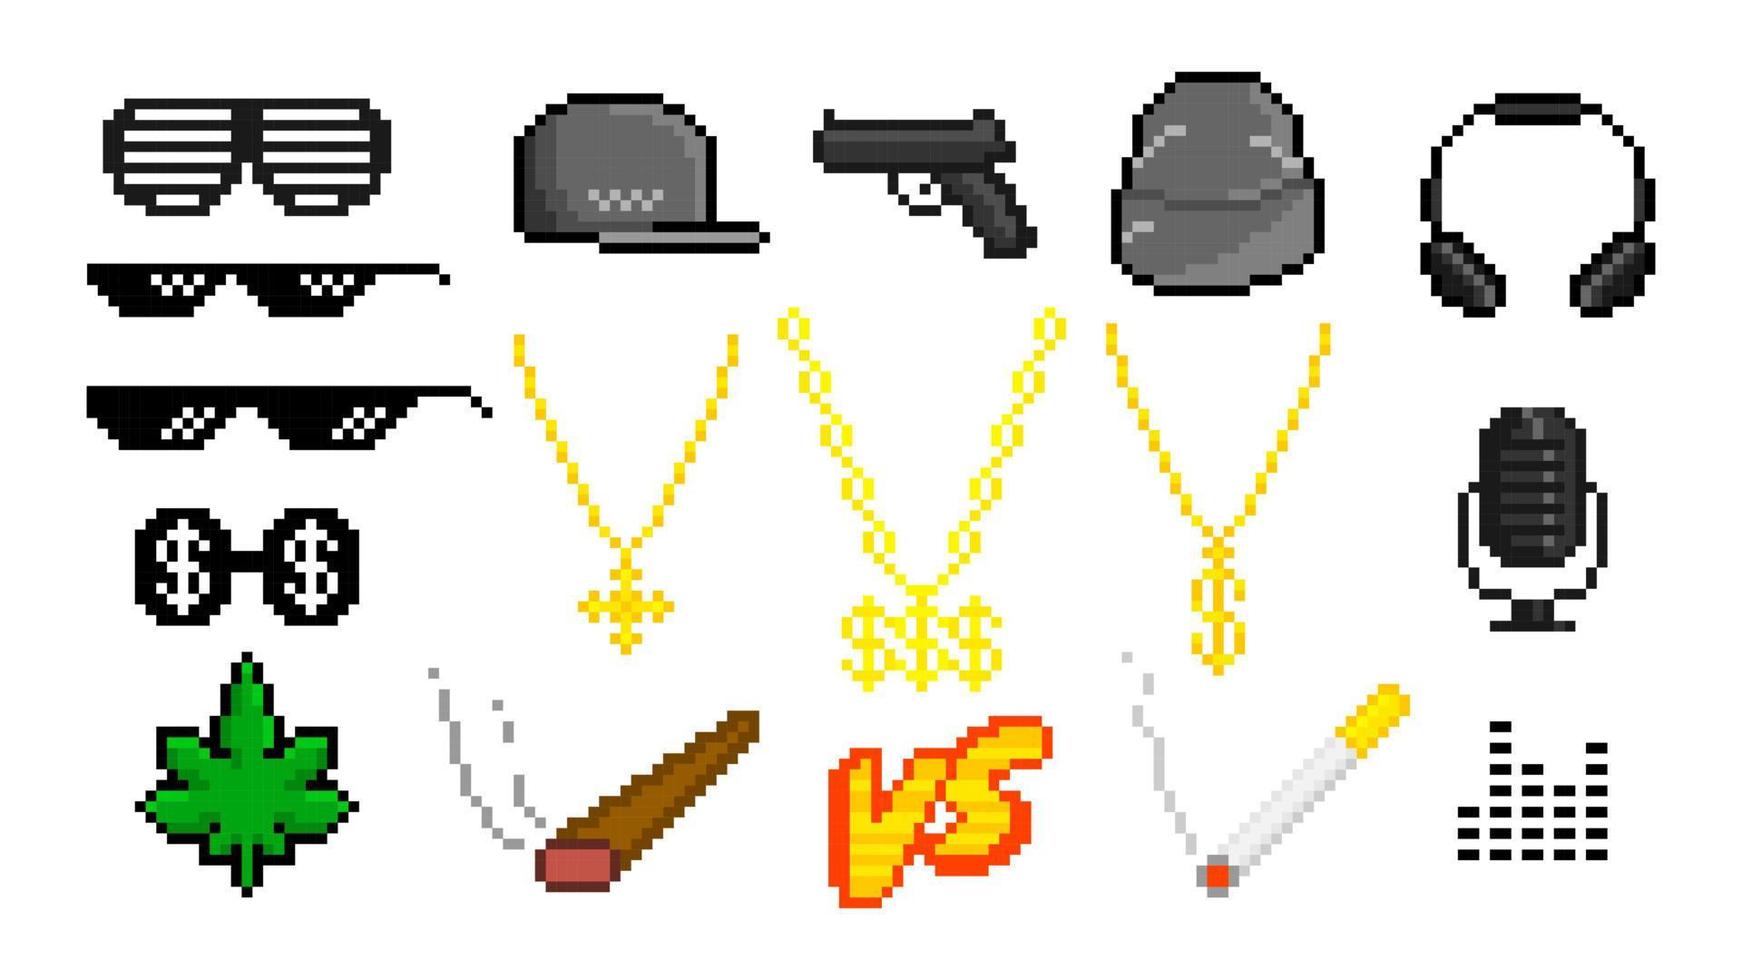 Rapper trending pixel things set. Hip hop baseball caps with gold chains with dollar sign and gun. Fashionable sunglasses and smoking jambs vc rap battle symbol black vector art.